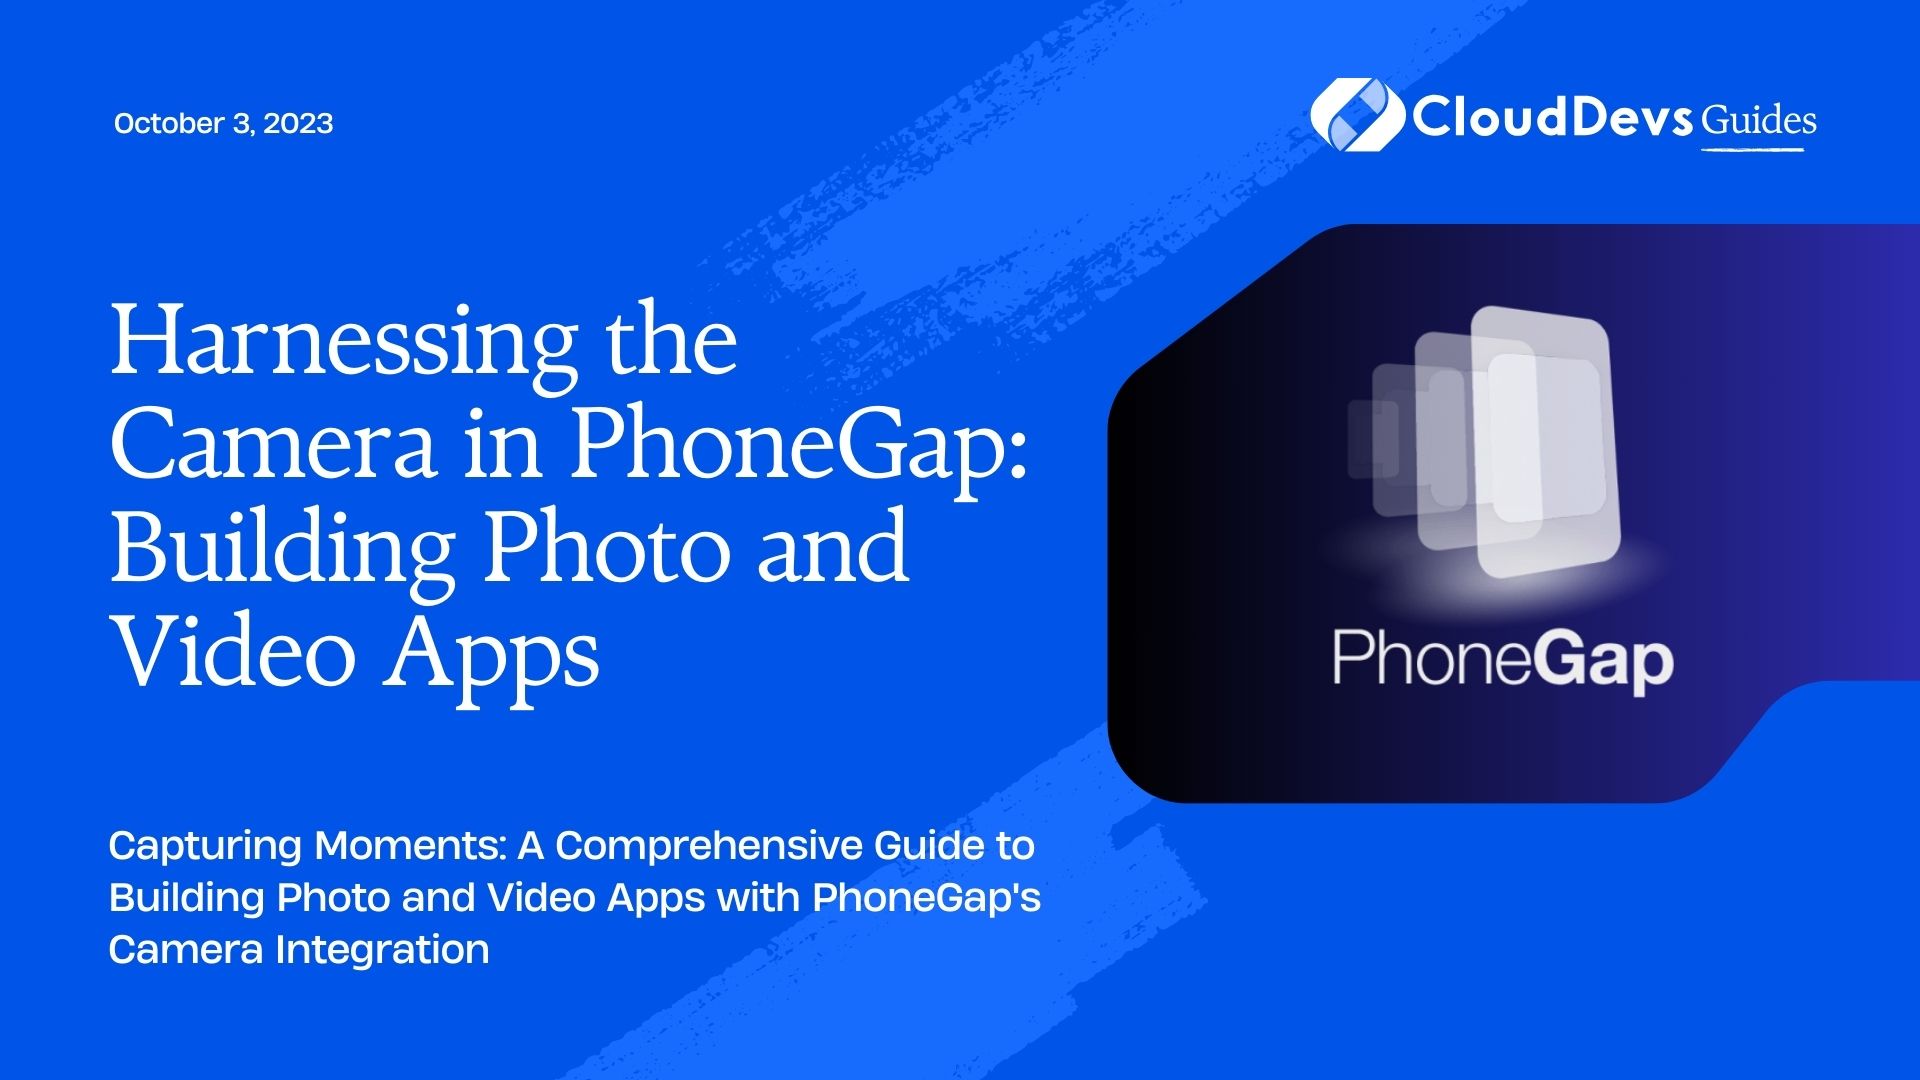 Harnessing the Camera in PhoneGap: Building Photo and Video Apps